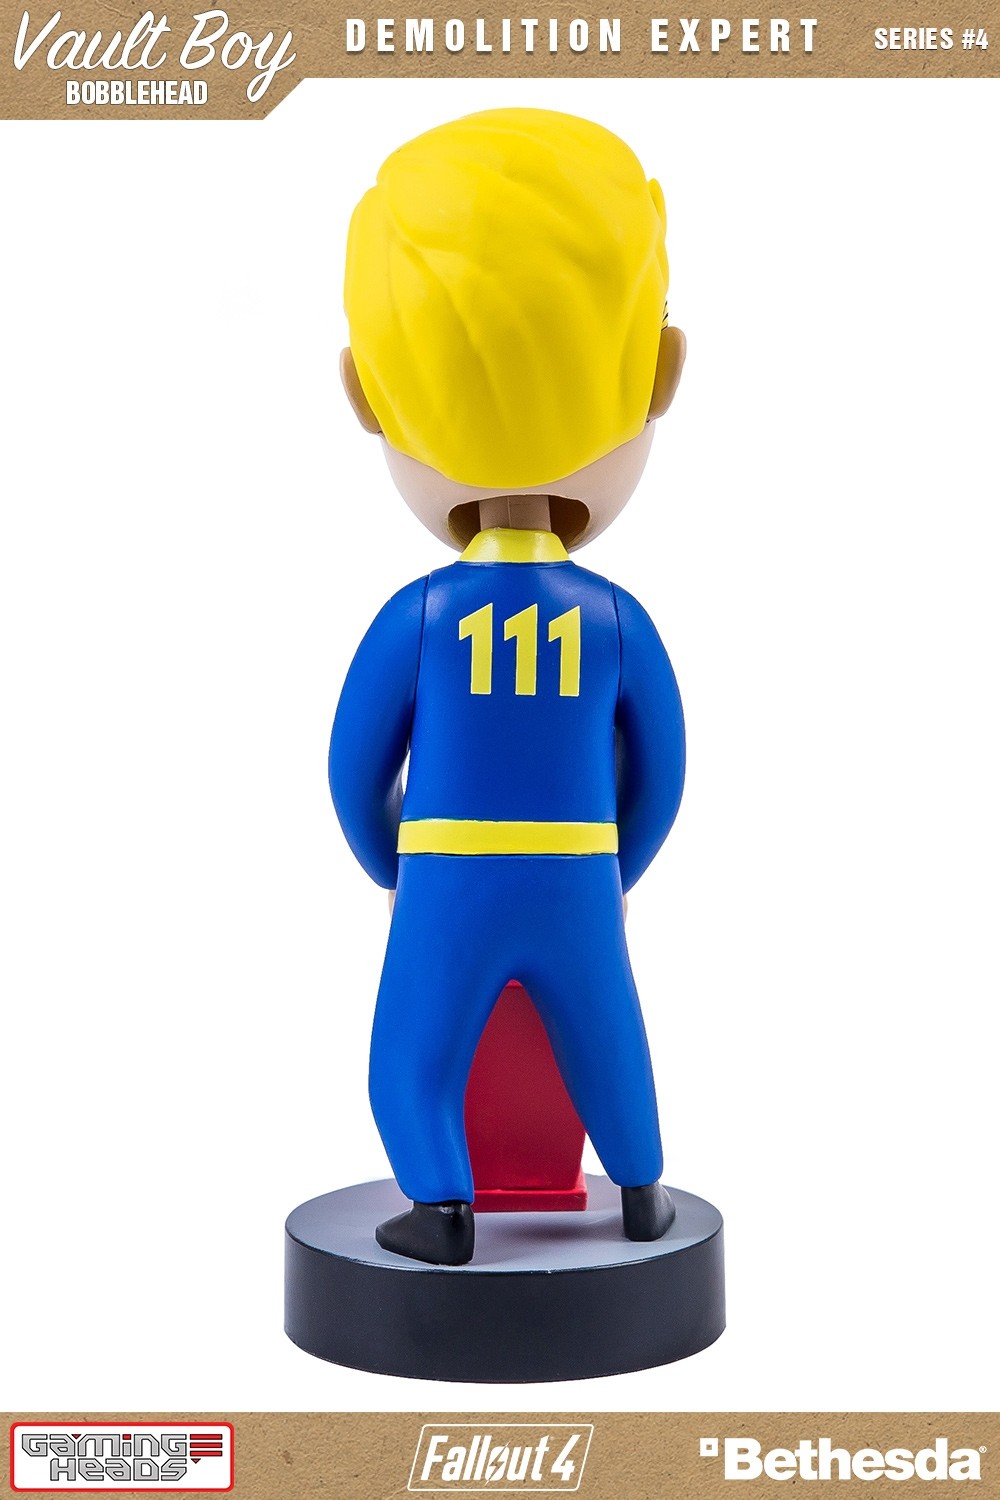 Bobbleheads in fallout 4 фото 82